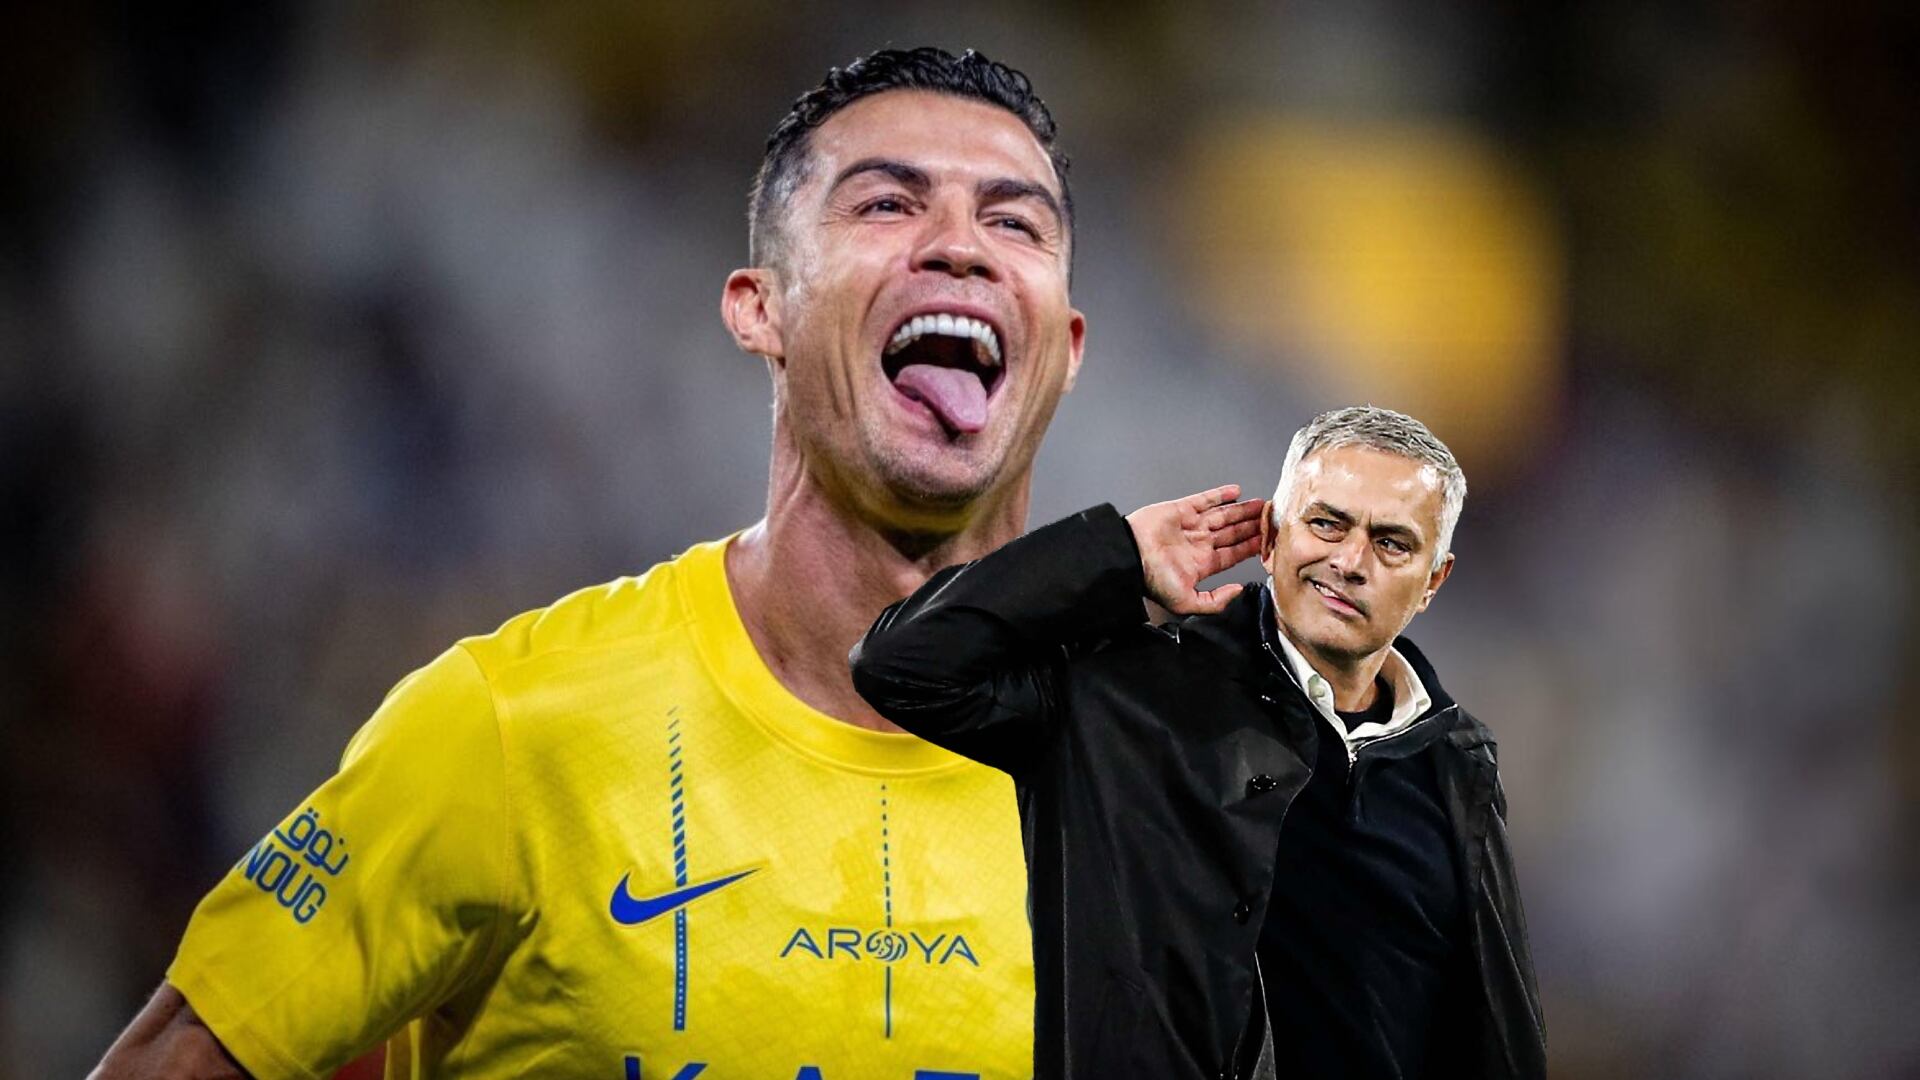 Cristiano's coach al Al Nassr talks about his possible exit, Mourinho aware for a possible meeting with CR7